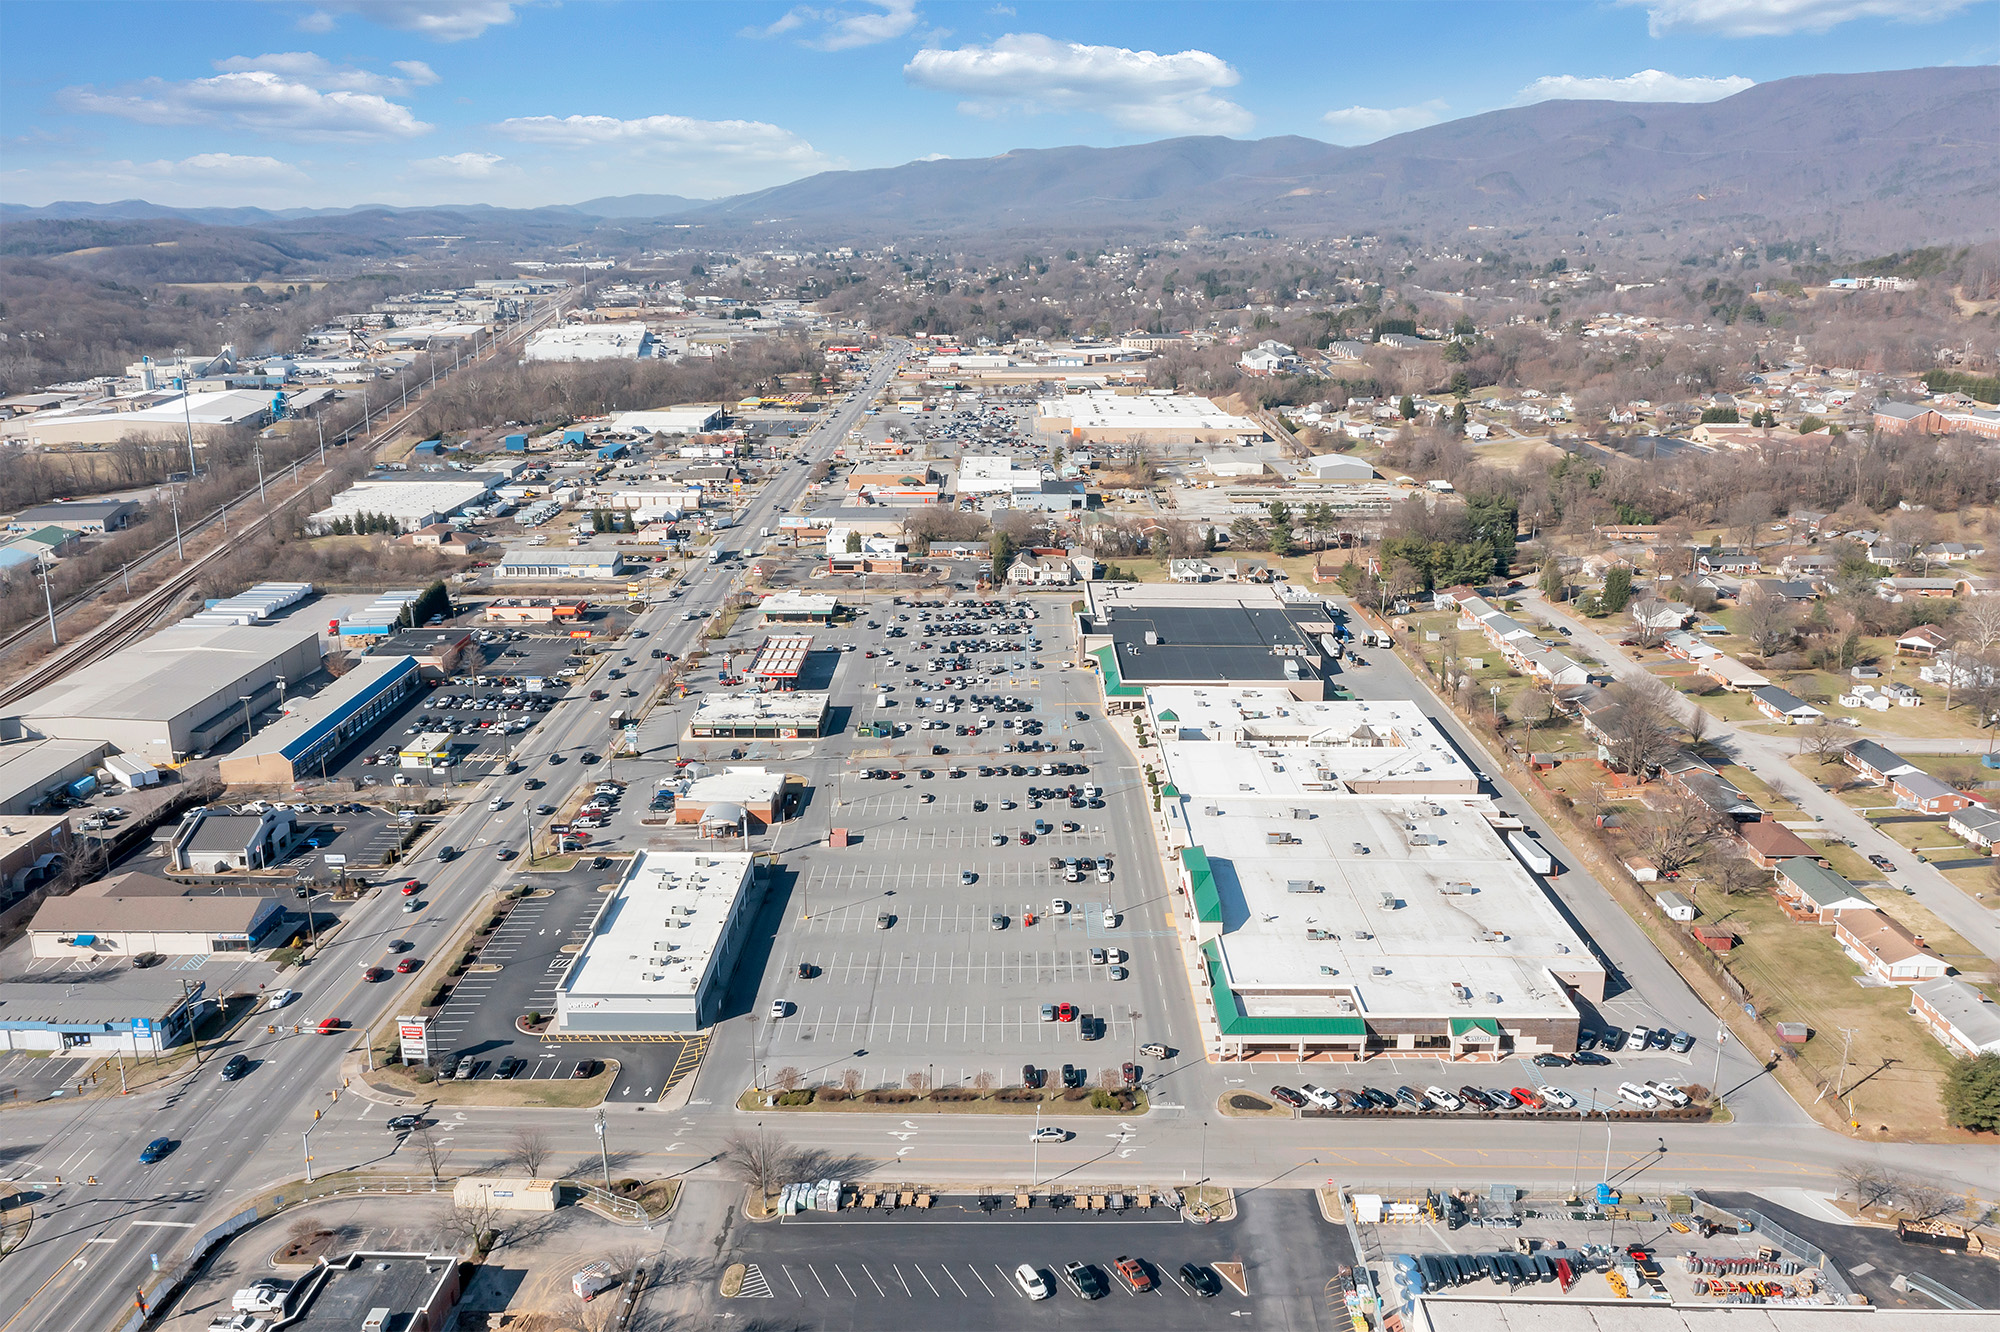 Drone view of Spartan Square and Main St with mountains in the distance.